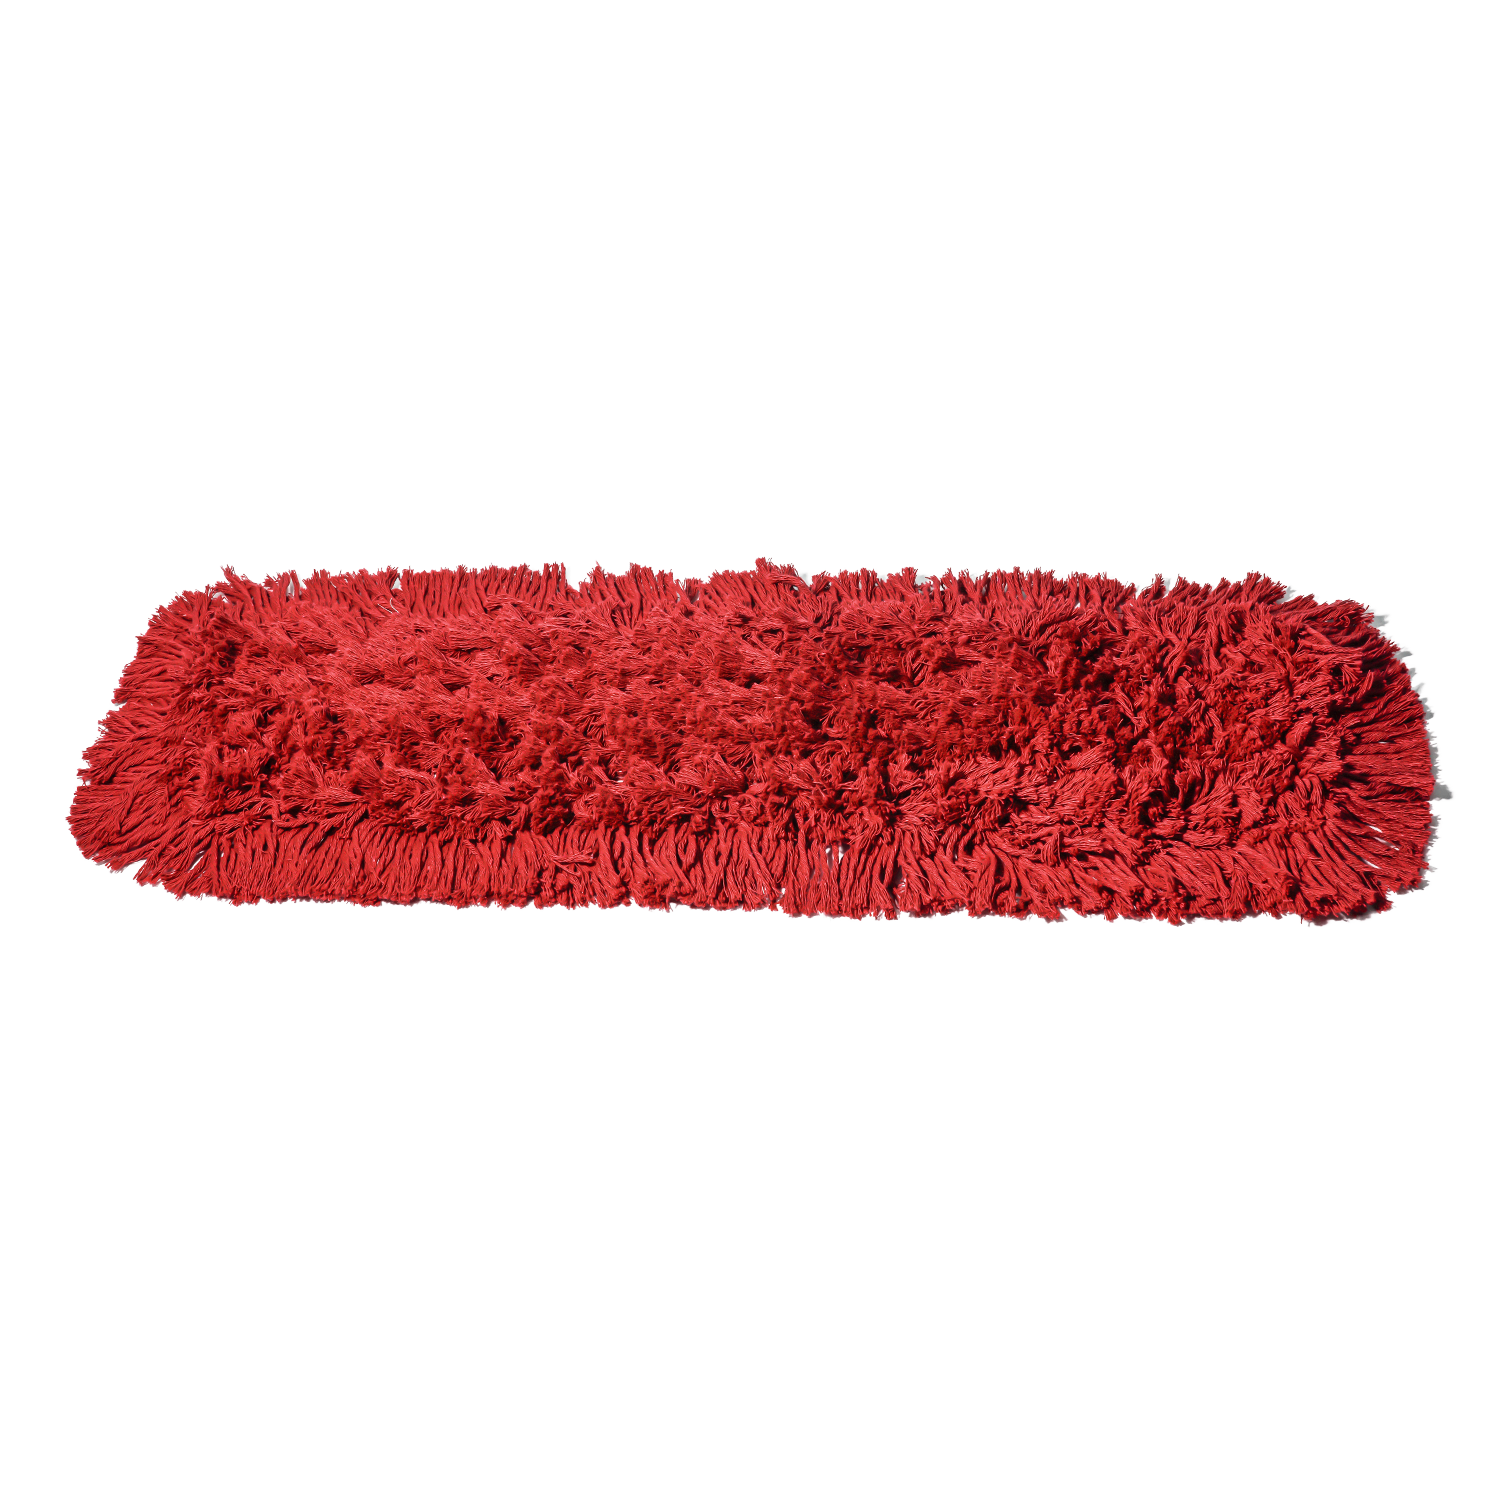 Tidy Tools 24 Inch Dust Mop Refill, Red